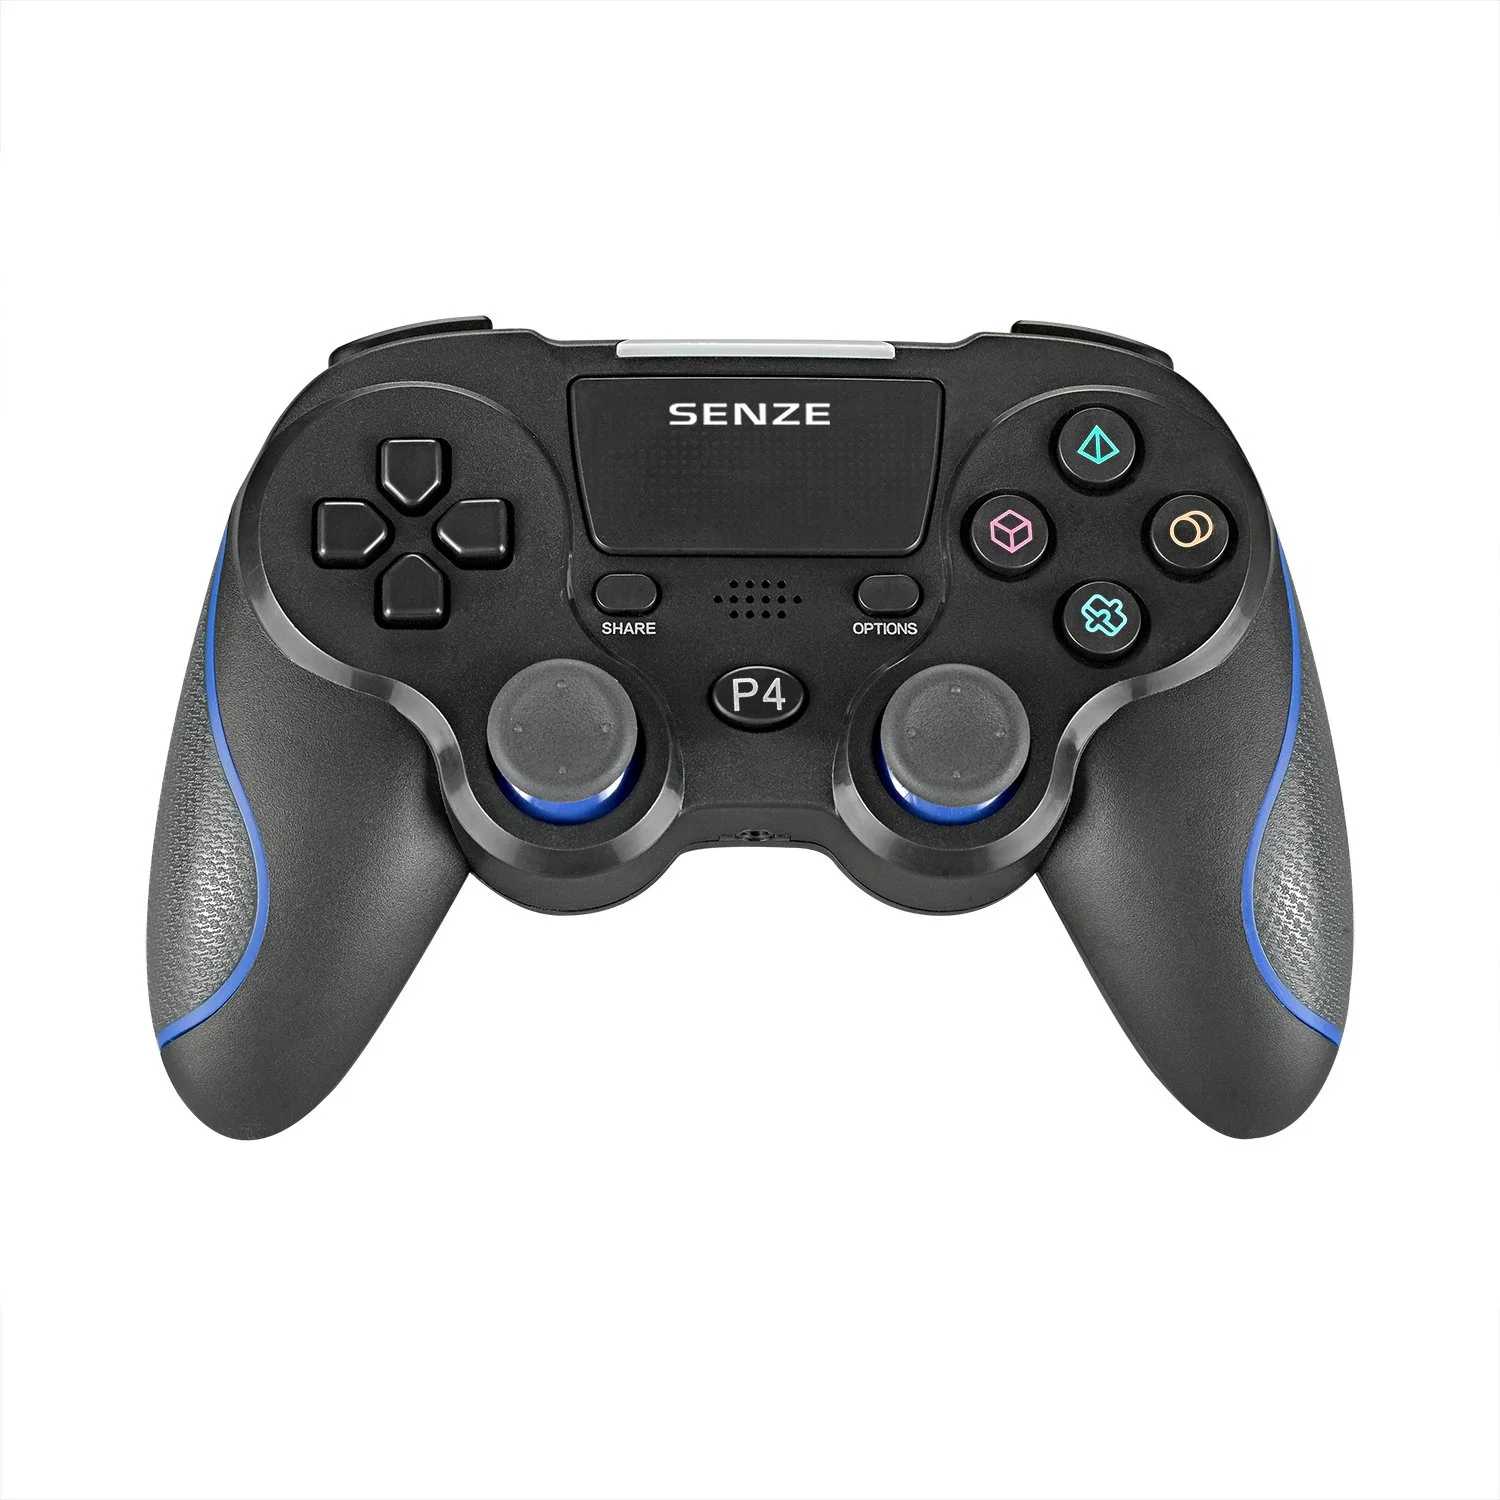 Senze Sz-4009b Wireless Model Video Game Accessories for PS4 with Bluetooth